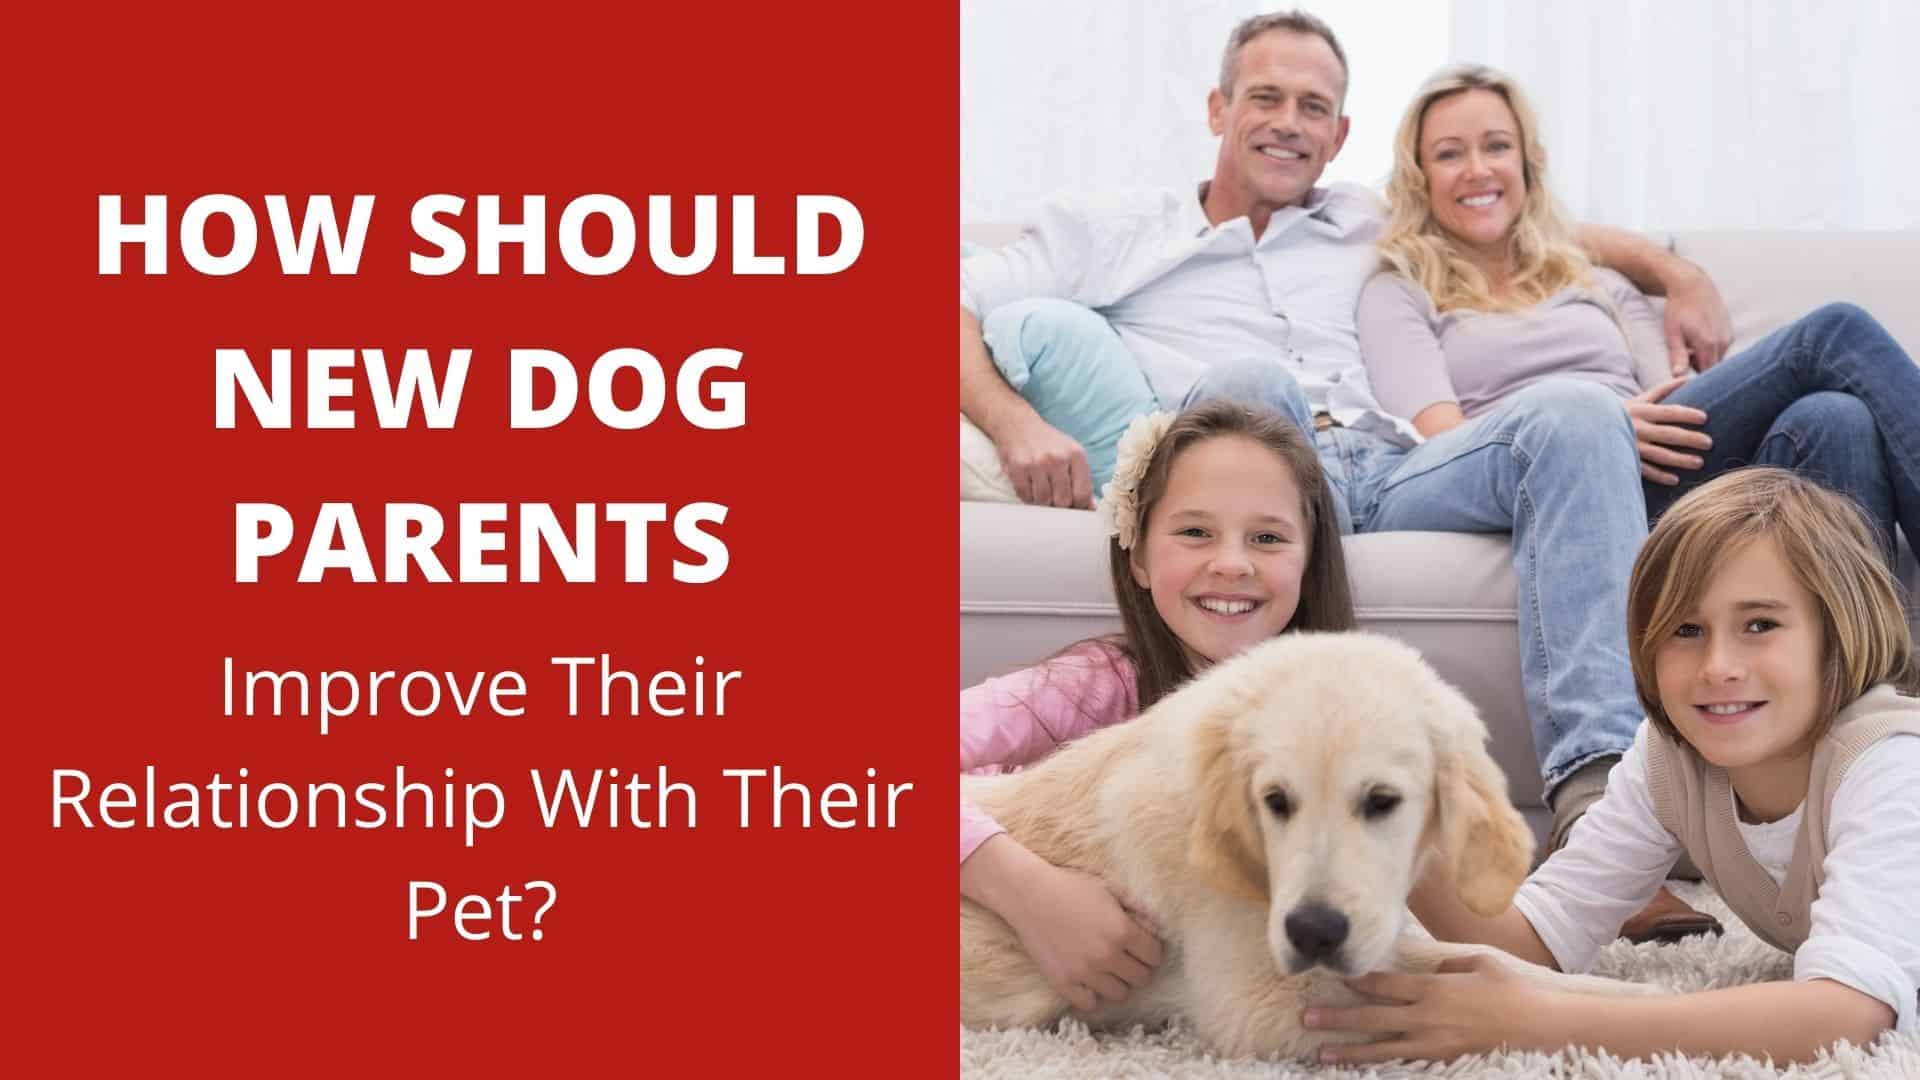 How Should New Dog Parents Improve Their Relationship With Their Pet?